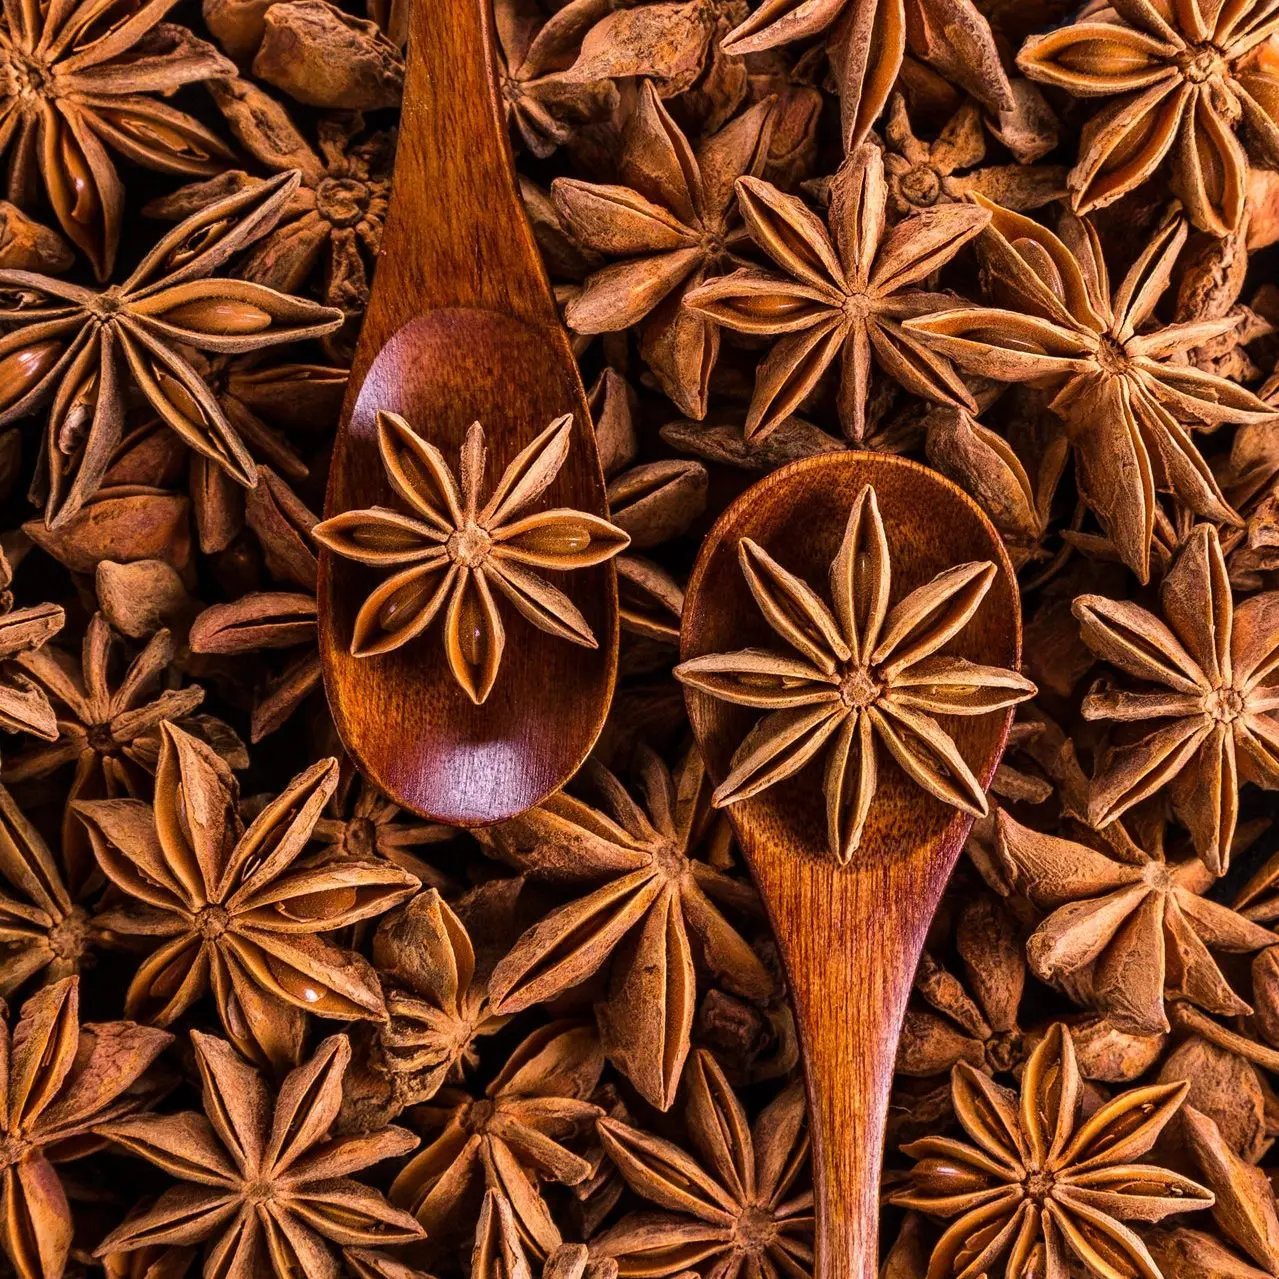 Star Anise 100% Organic High Quality The Best Choice Of High Quality Vietnamese Dried Flower Star Anise For Cooking